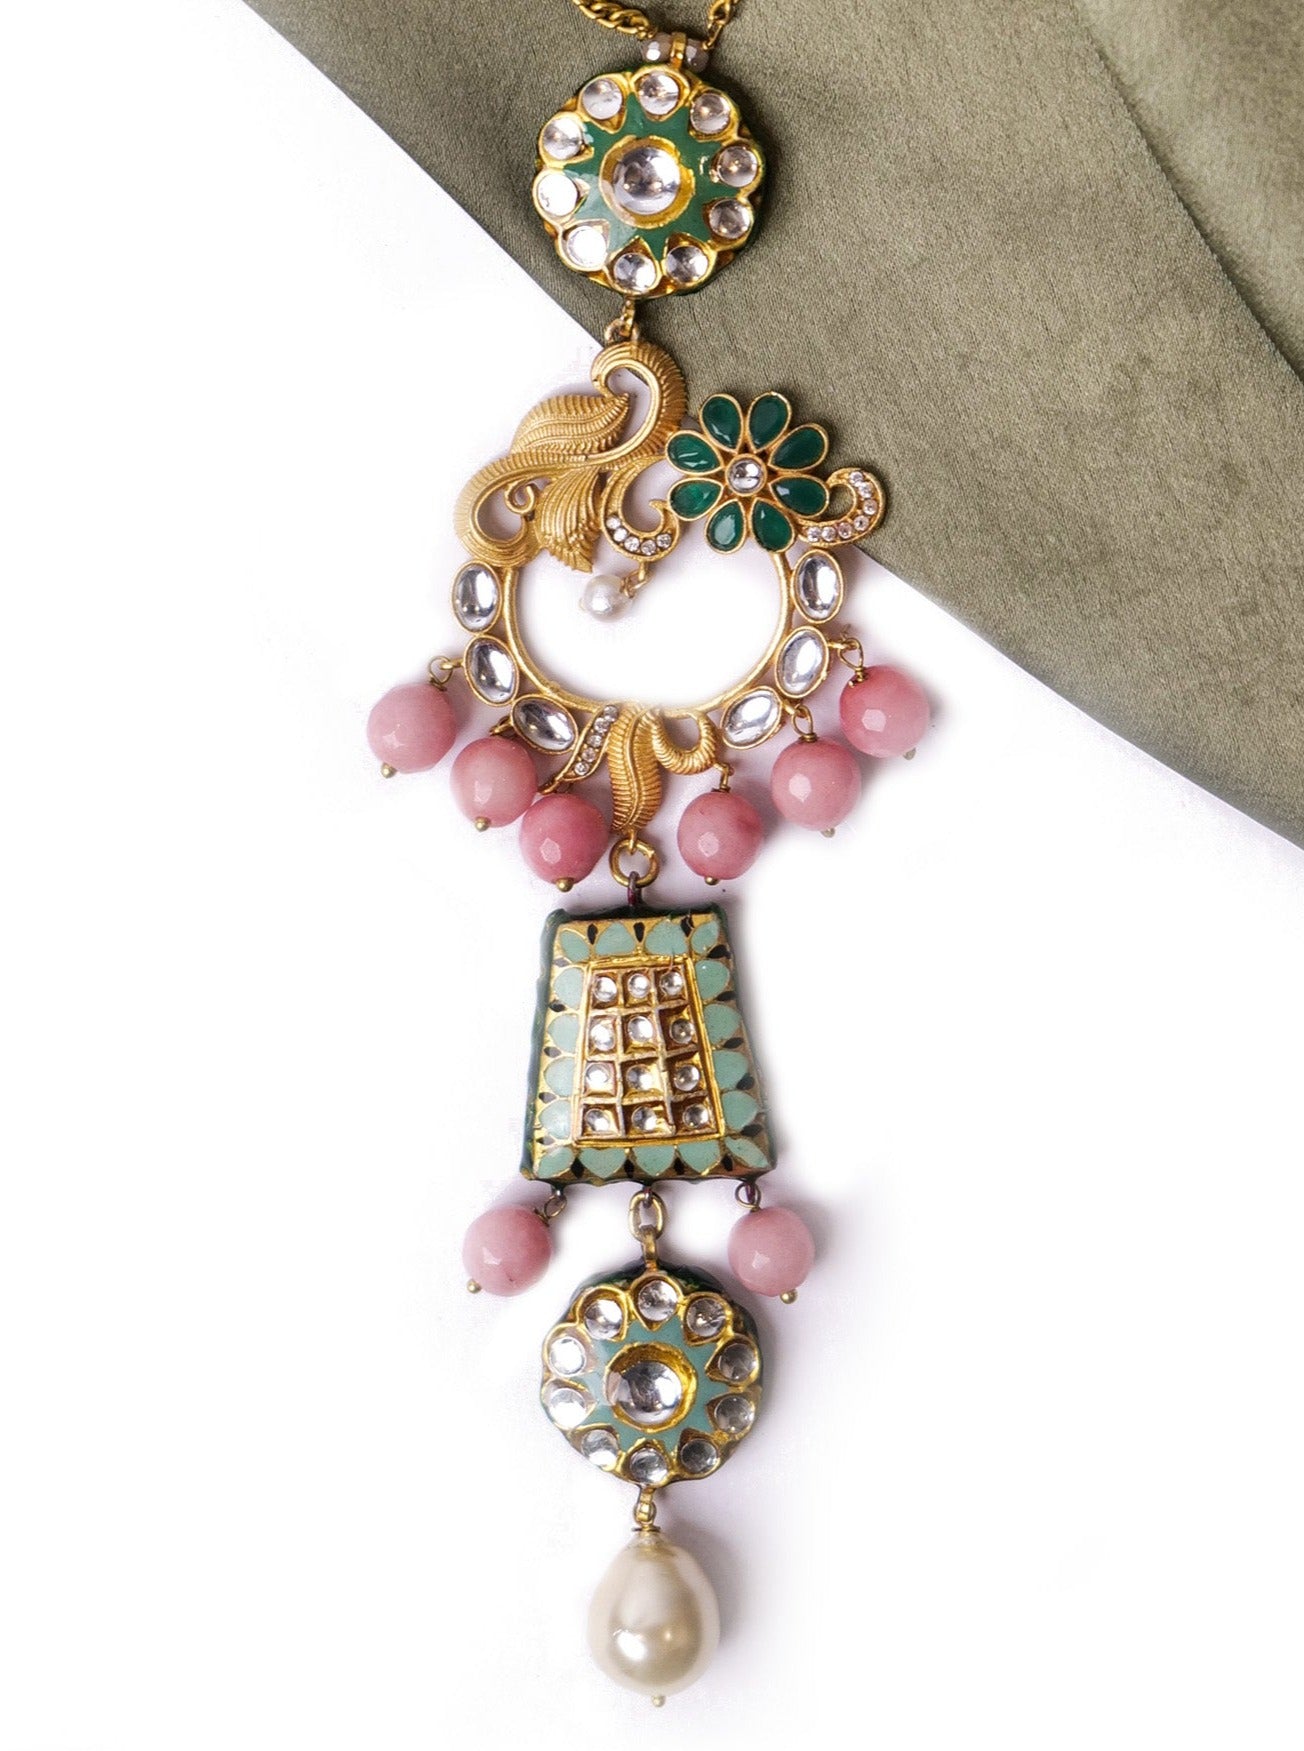 Long fusion necklace with meenakari